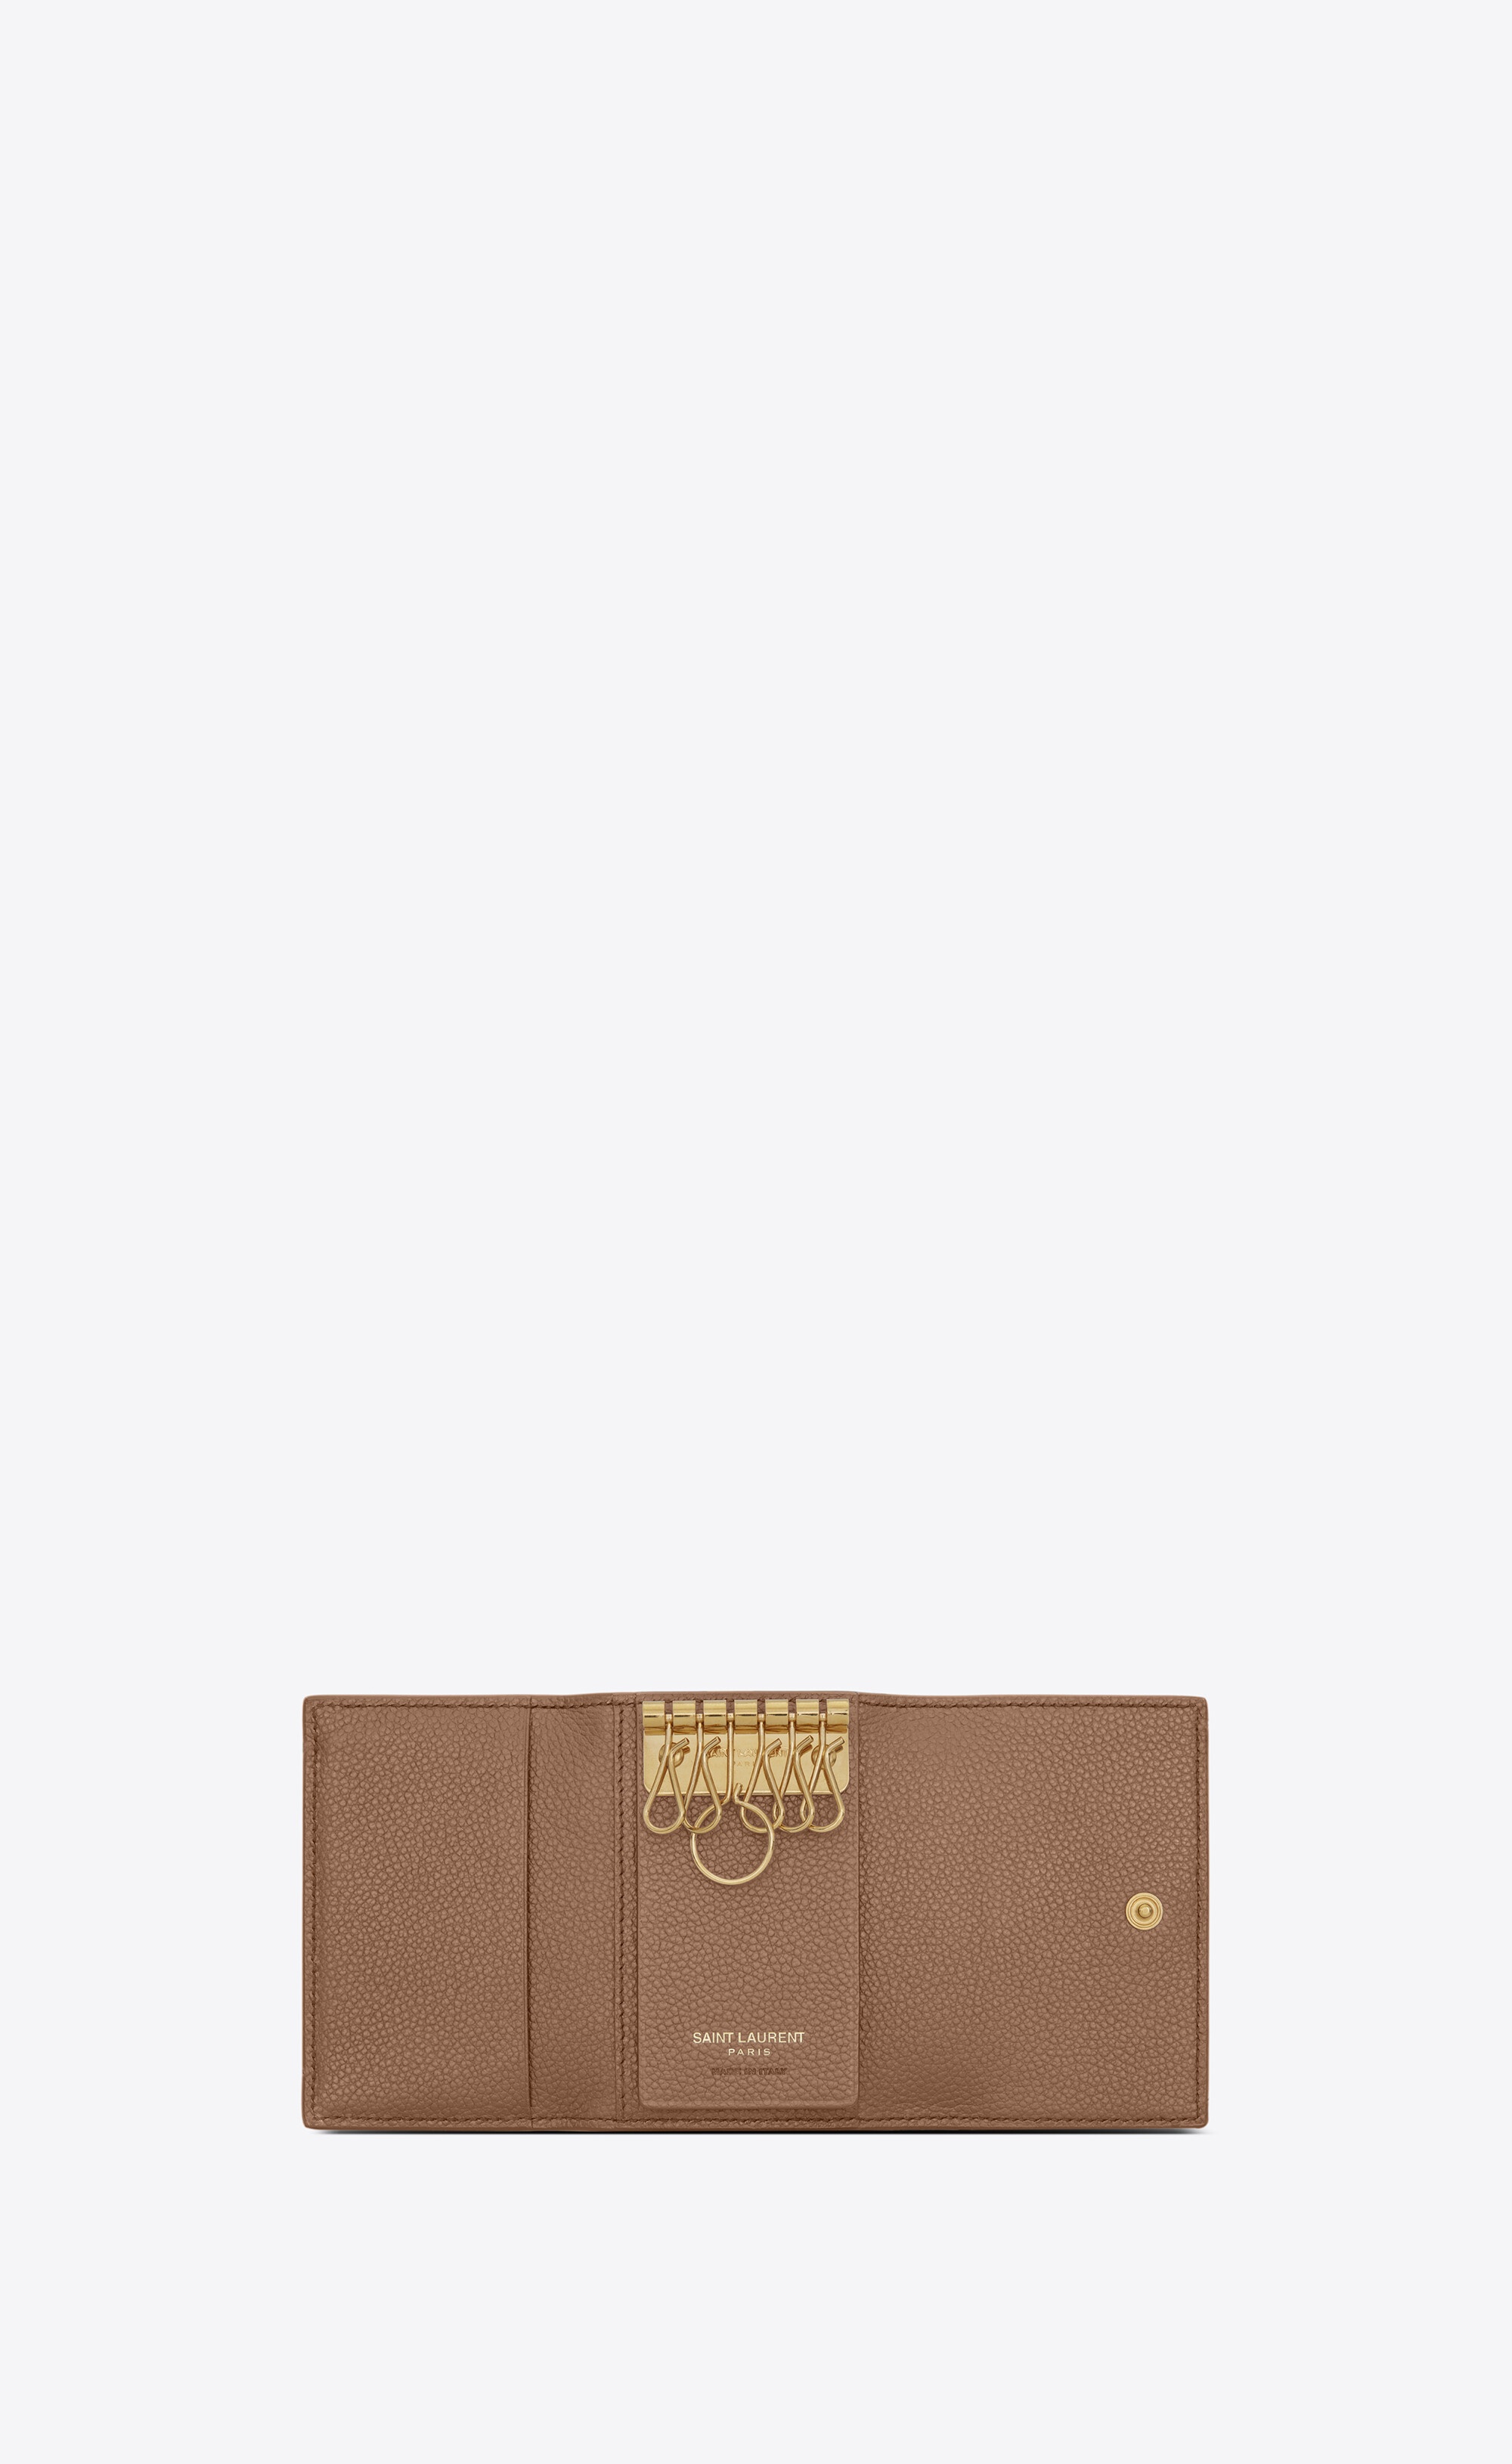 ysl line key case in grained leather - 4